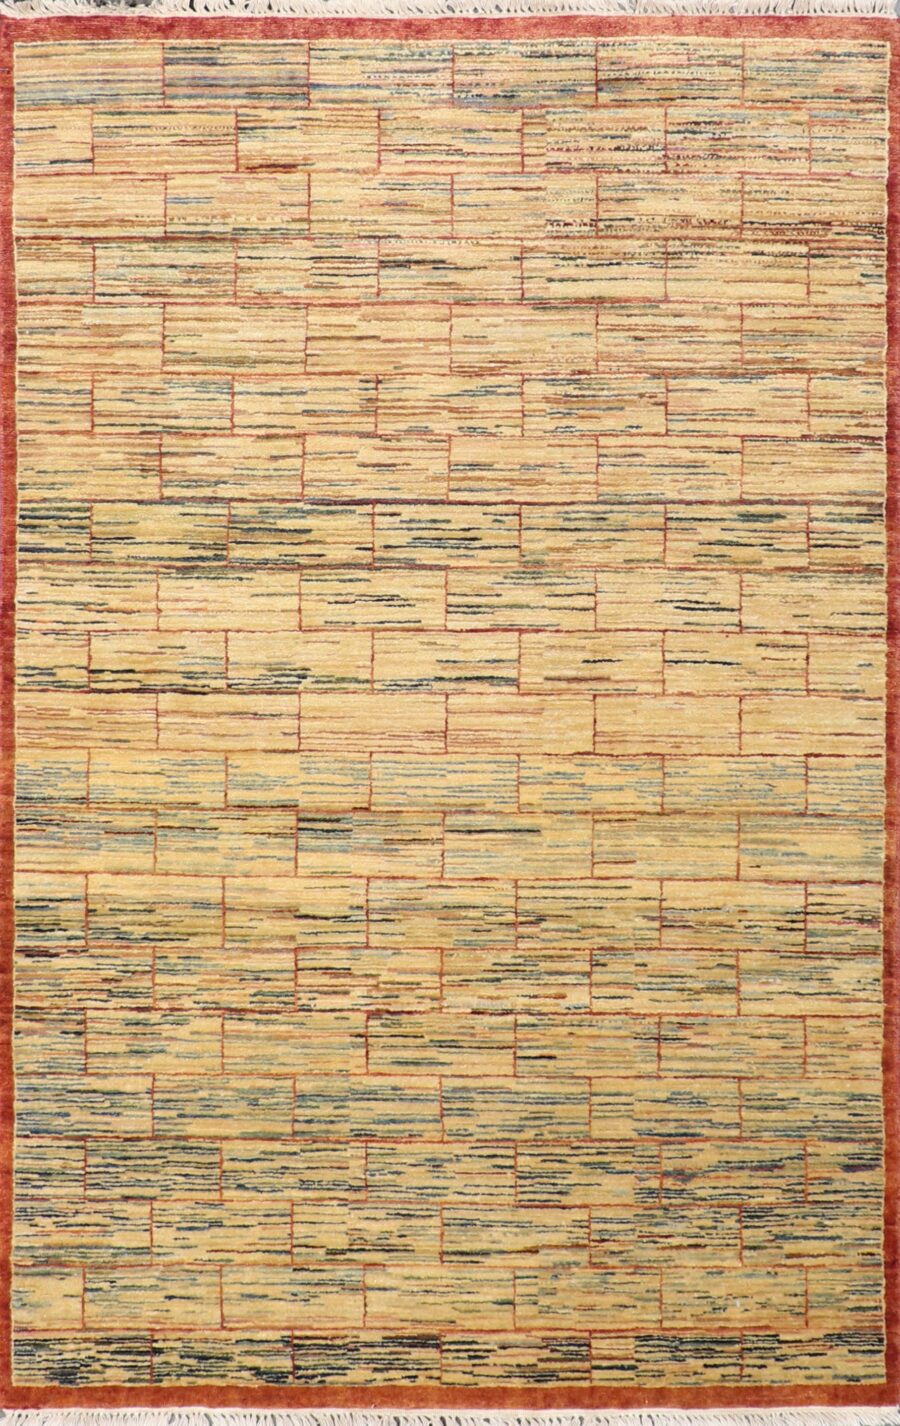 4’11”x7’8” Decorative Tan Wool Hand-Knotted Rug - Direct Rug Import | Rugs in Chicago, Indiana,South Bend,Granger